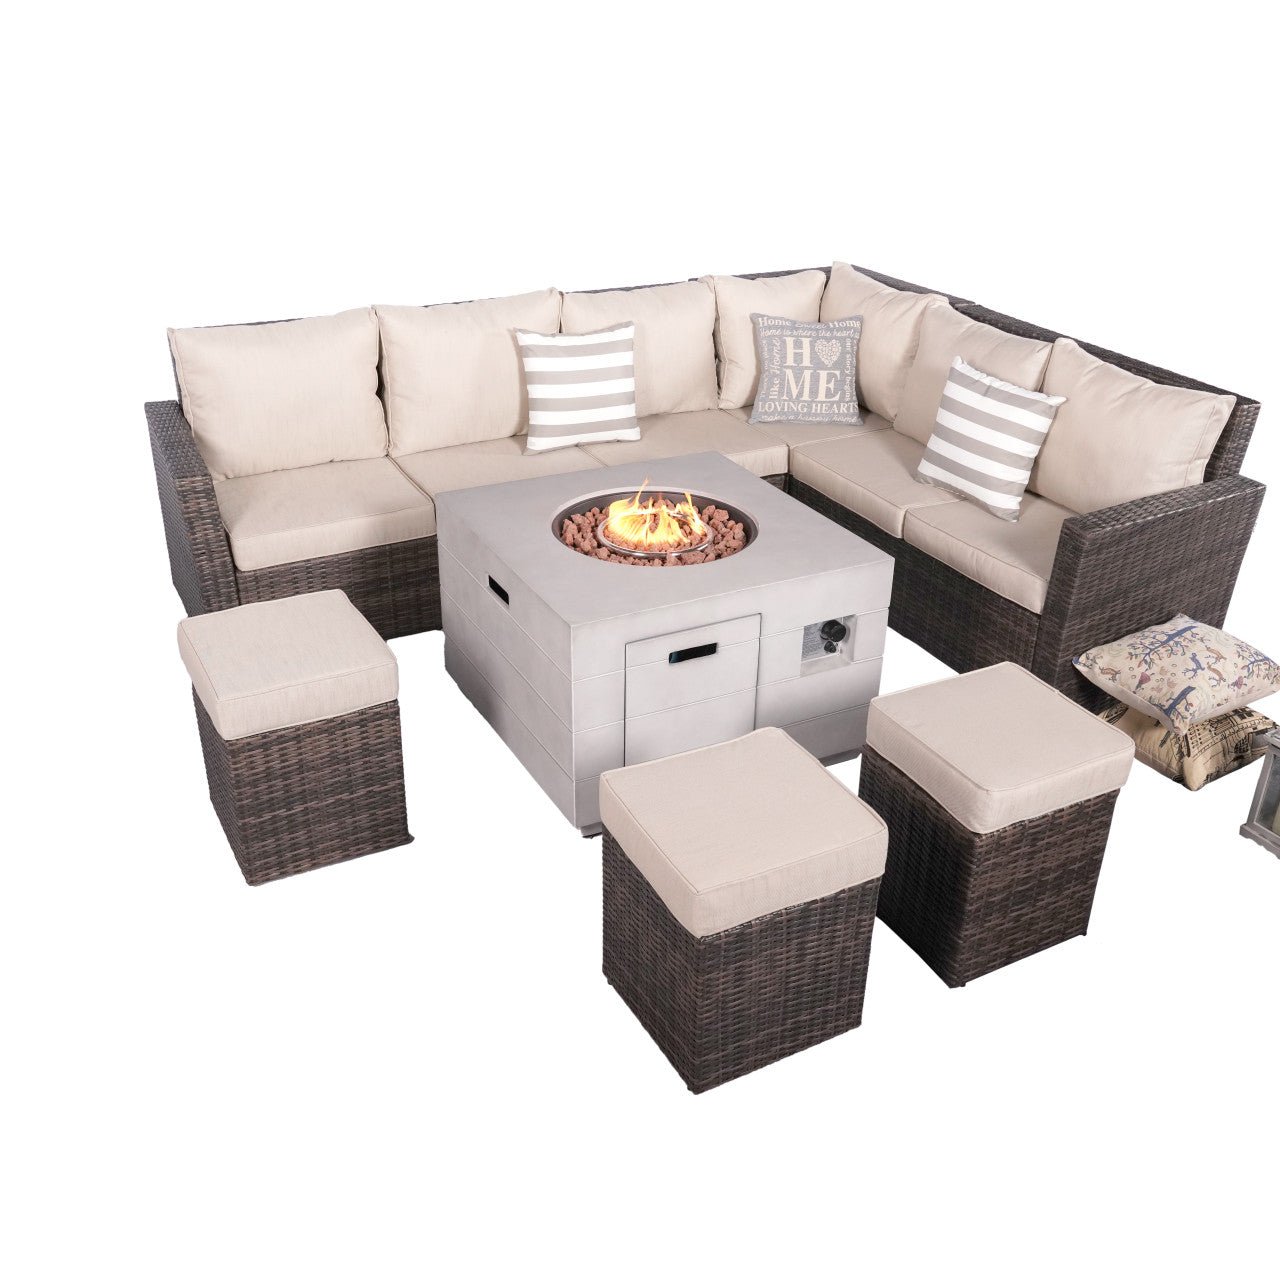 -8-Piece Brown Wicker Patio Fire Pit Sofa Set Conversation Furniture Set - Outdoor Style Company